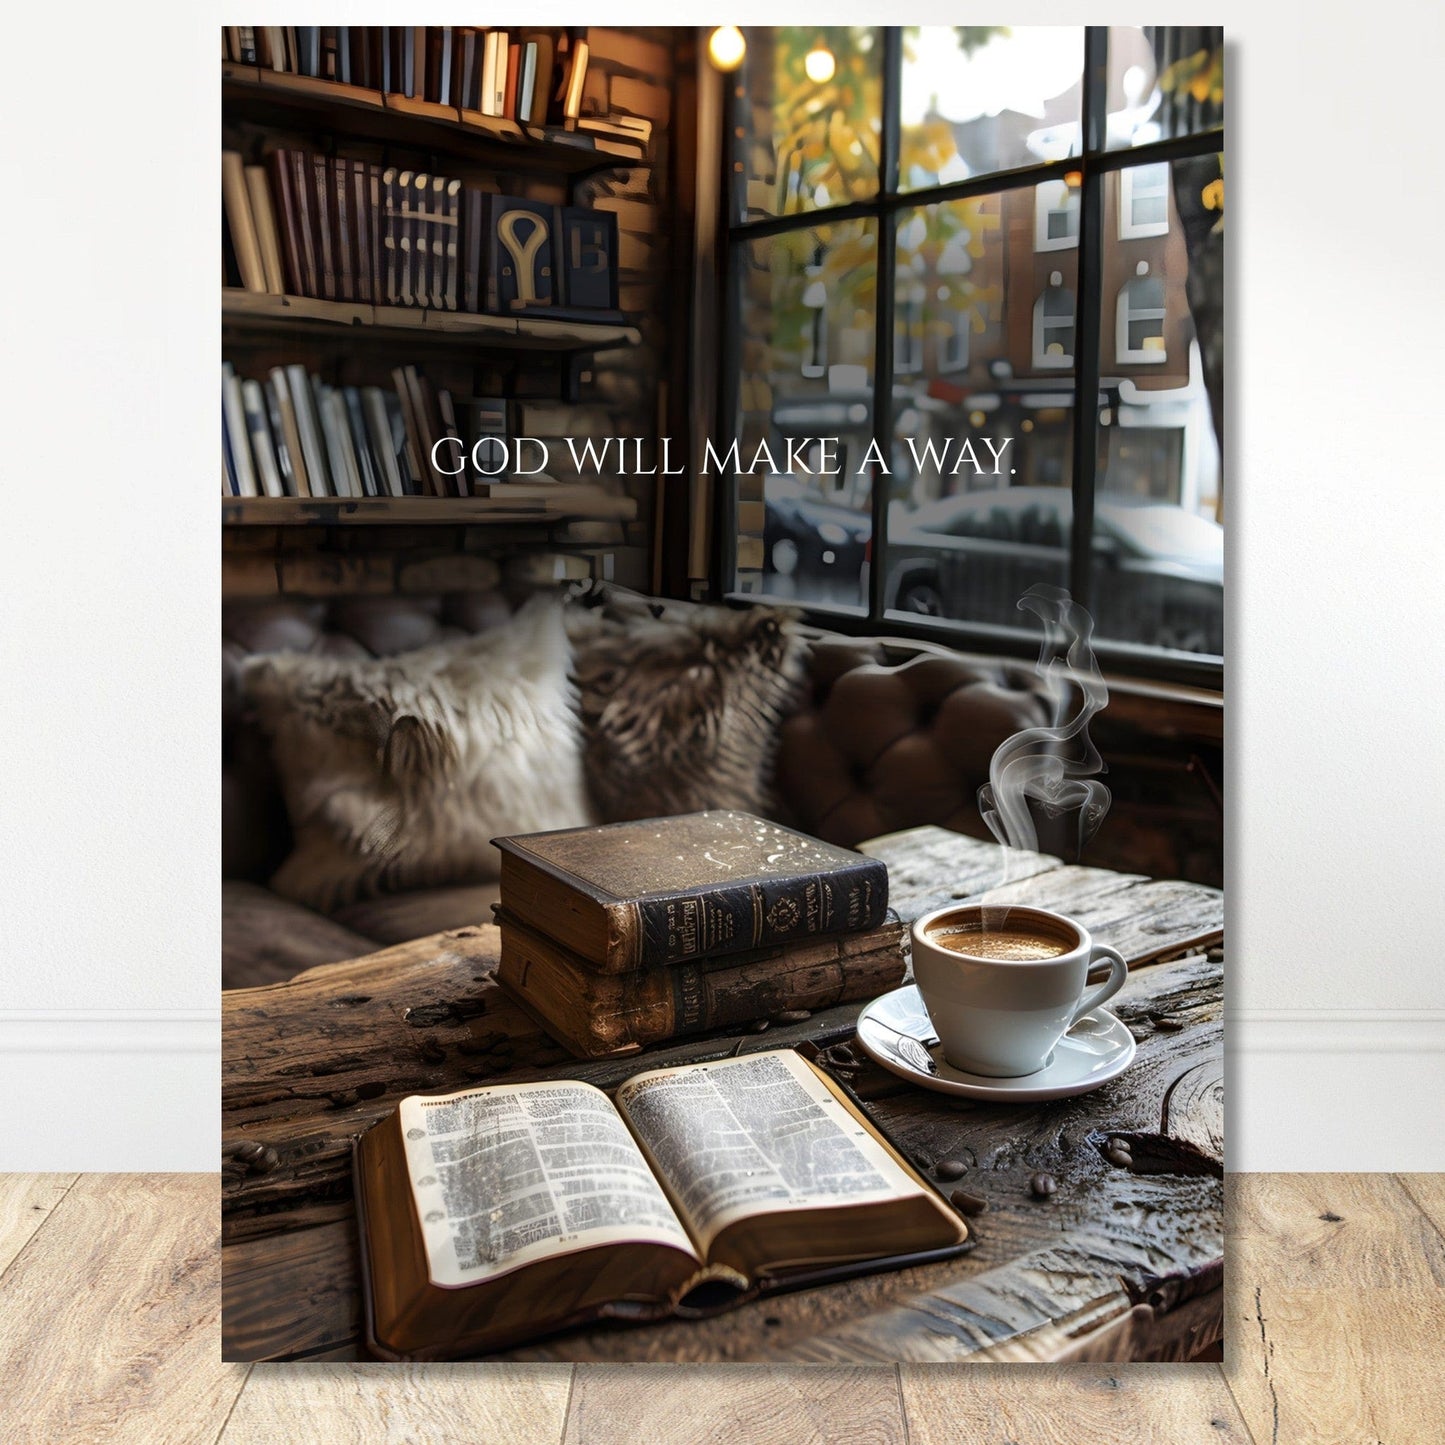 Coffee With My Father Print Material 30x40 cm / 12x16″ / Premium Matte Paper Poster / - God Will Make A Way